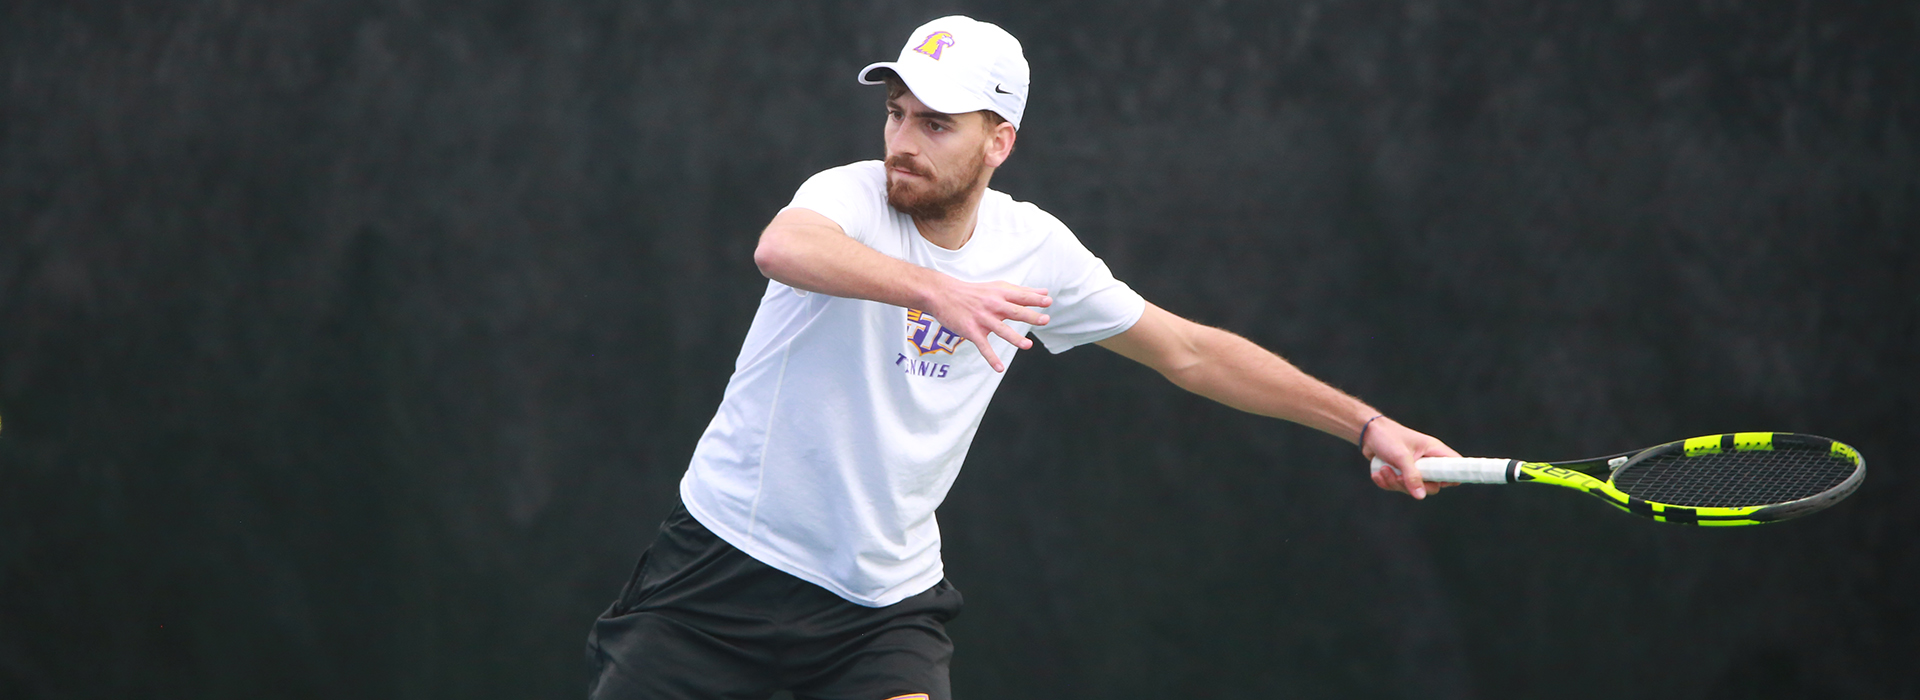 Vicente named OVC co-Male Tennis Athlete of the Week